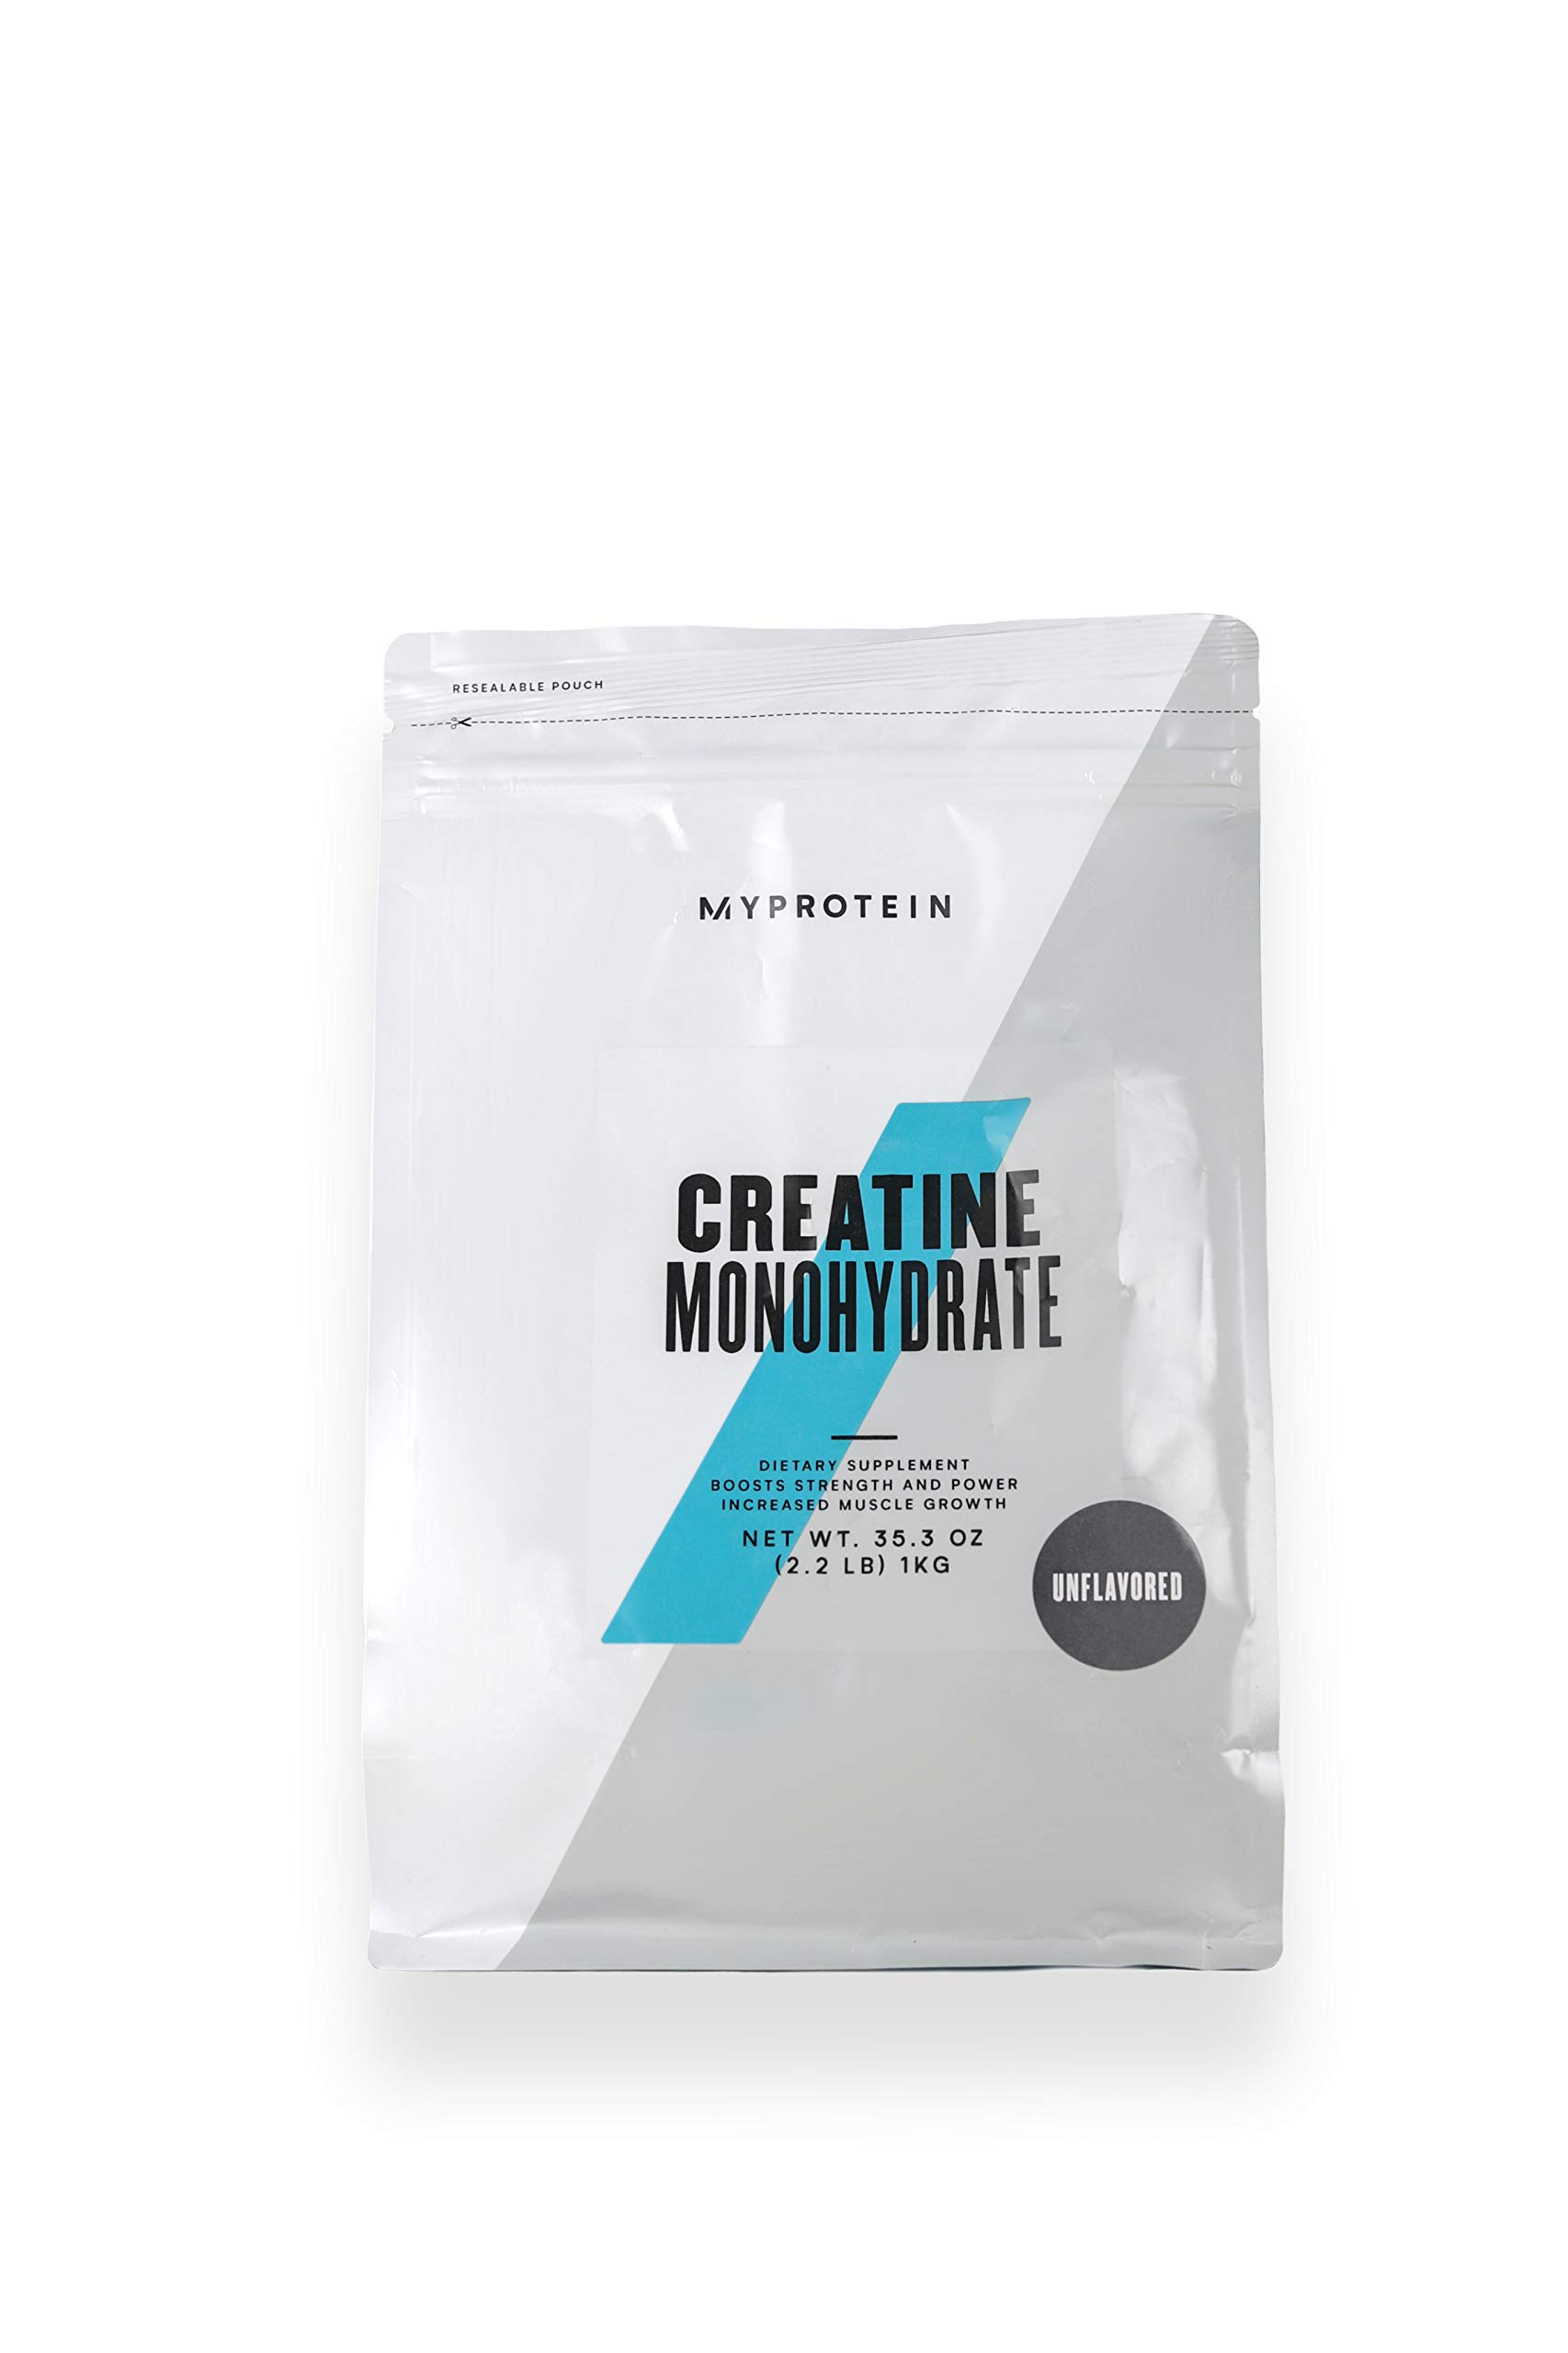 Book Cover Myprotein - Creatine Monohydrate Powder Bag 2.2 lbs- Pure Unflavored Creatine Powder - Post/Pre Workout Supplement for All Sports and Exercises - Gluten Free, Vegan, Dissolves Easy - (200 Servings) 200.0 Servings (Pack of 1)